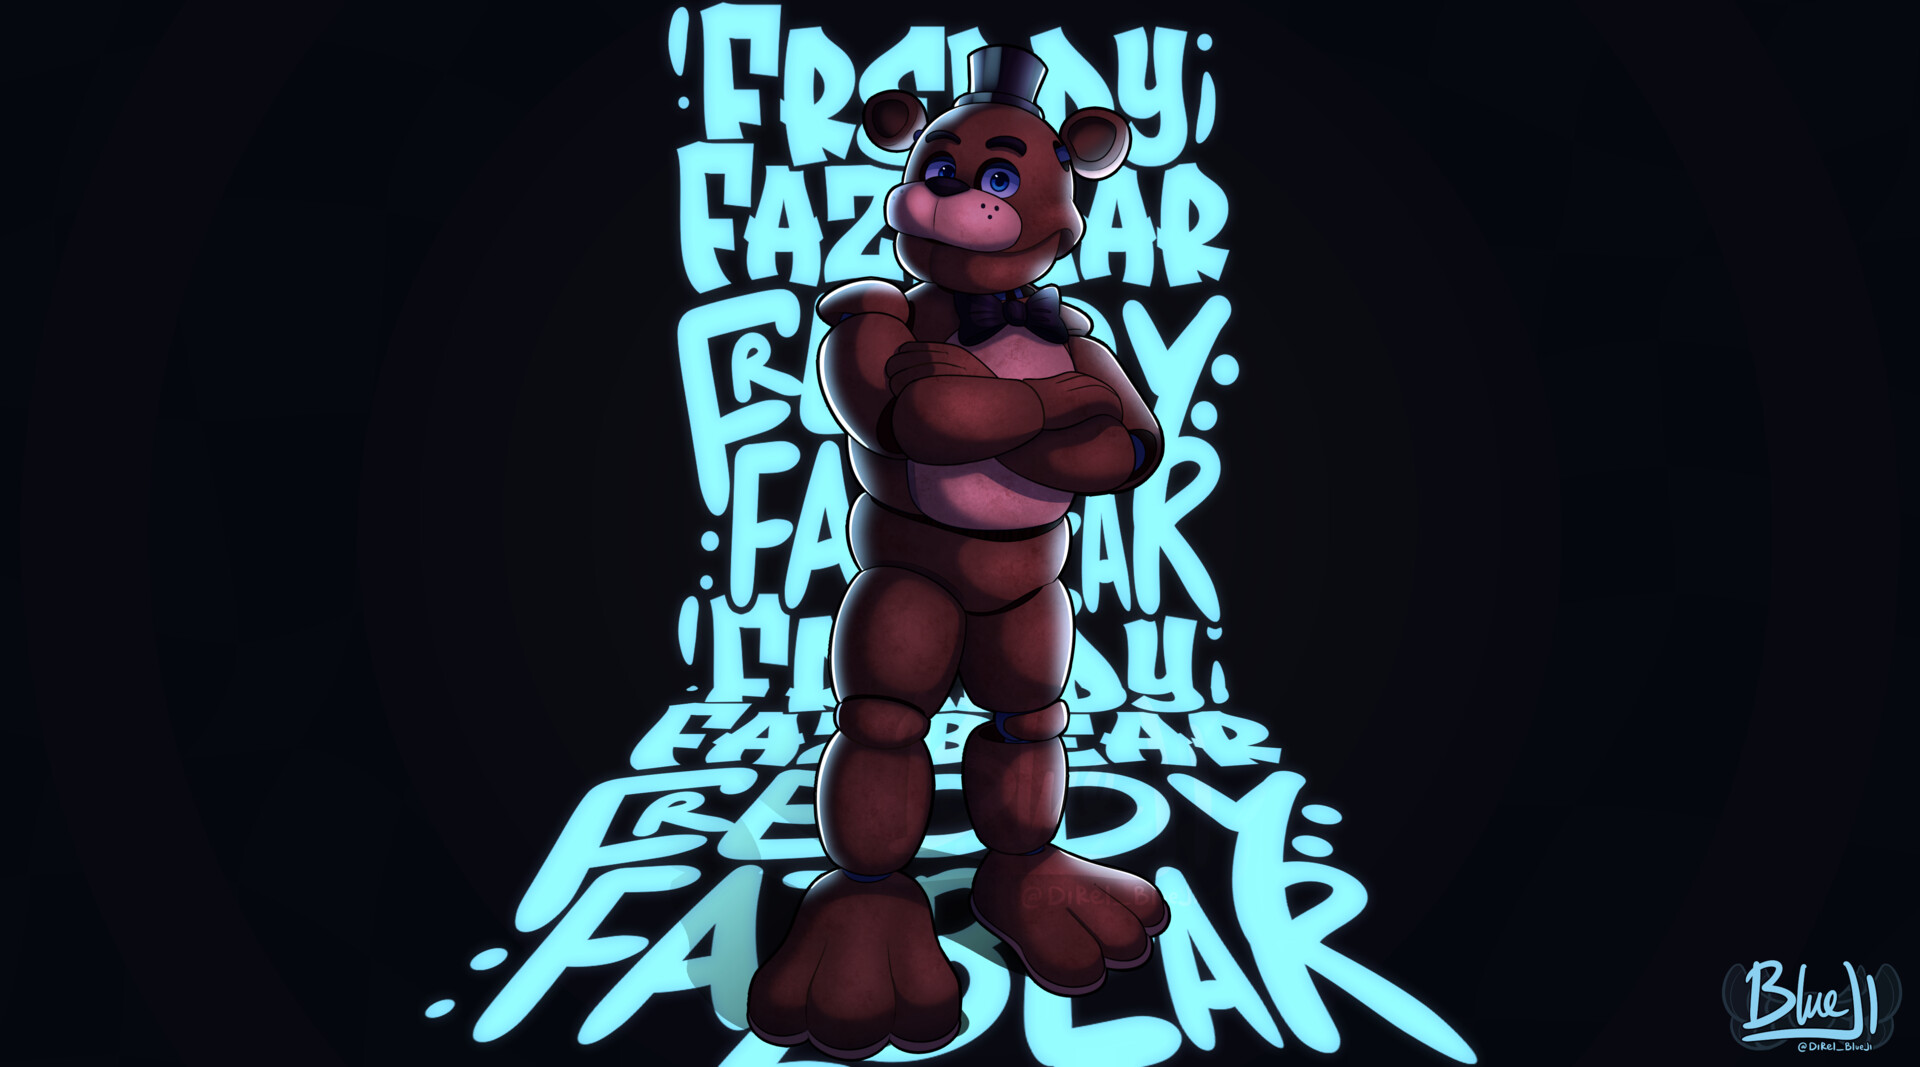 Wallpaper ID 297147  Video Game Five Nights at Freddys Phone Wallpaper   2160x3840 free download